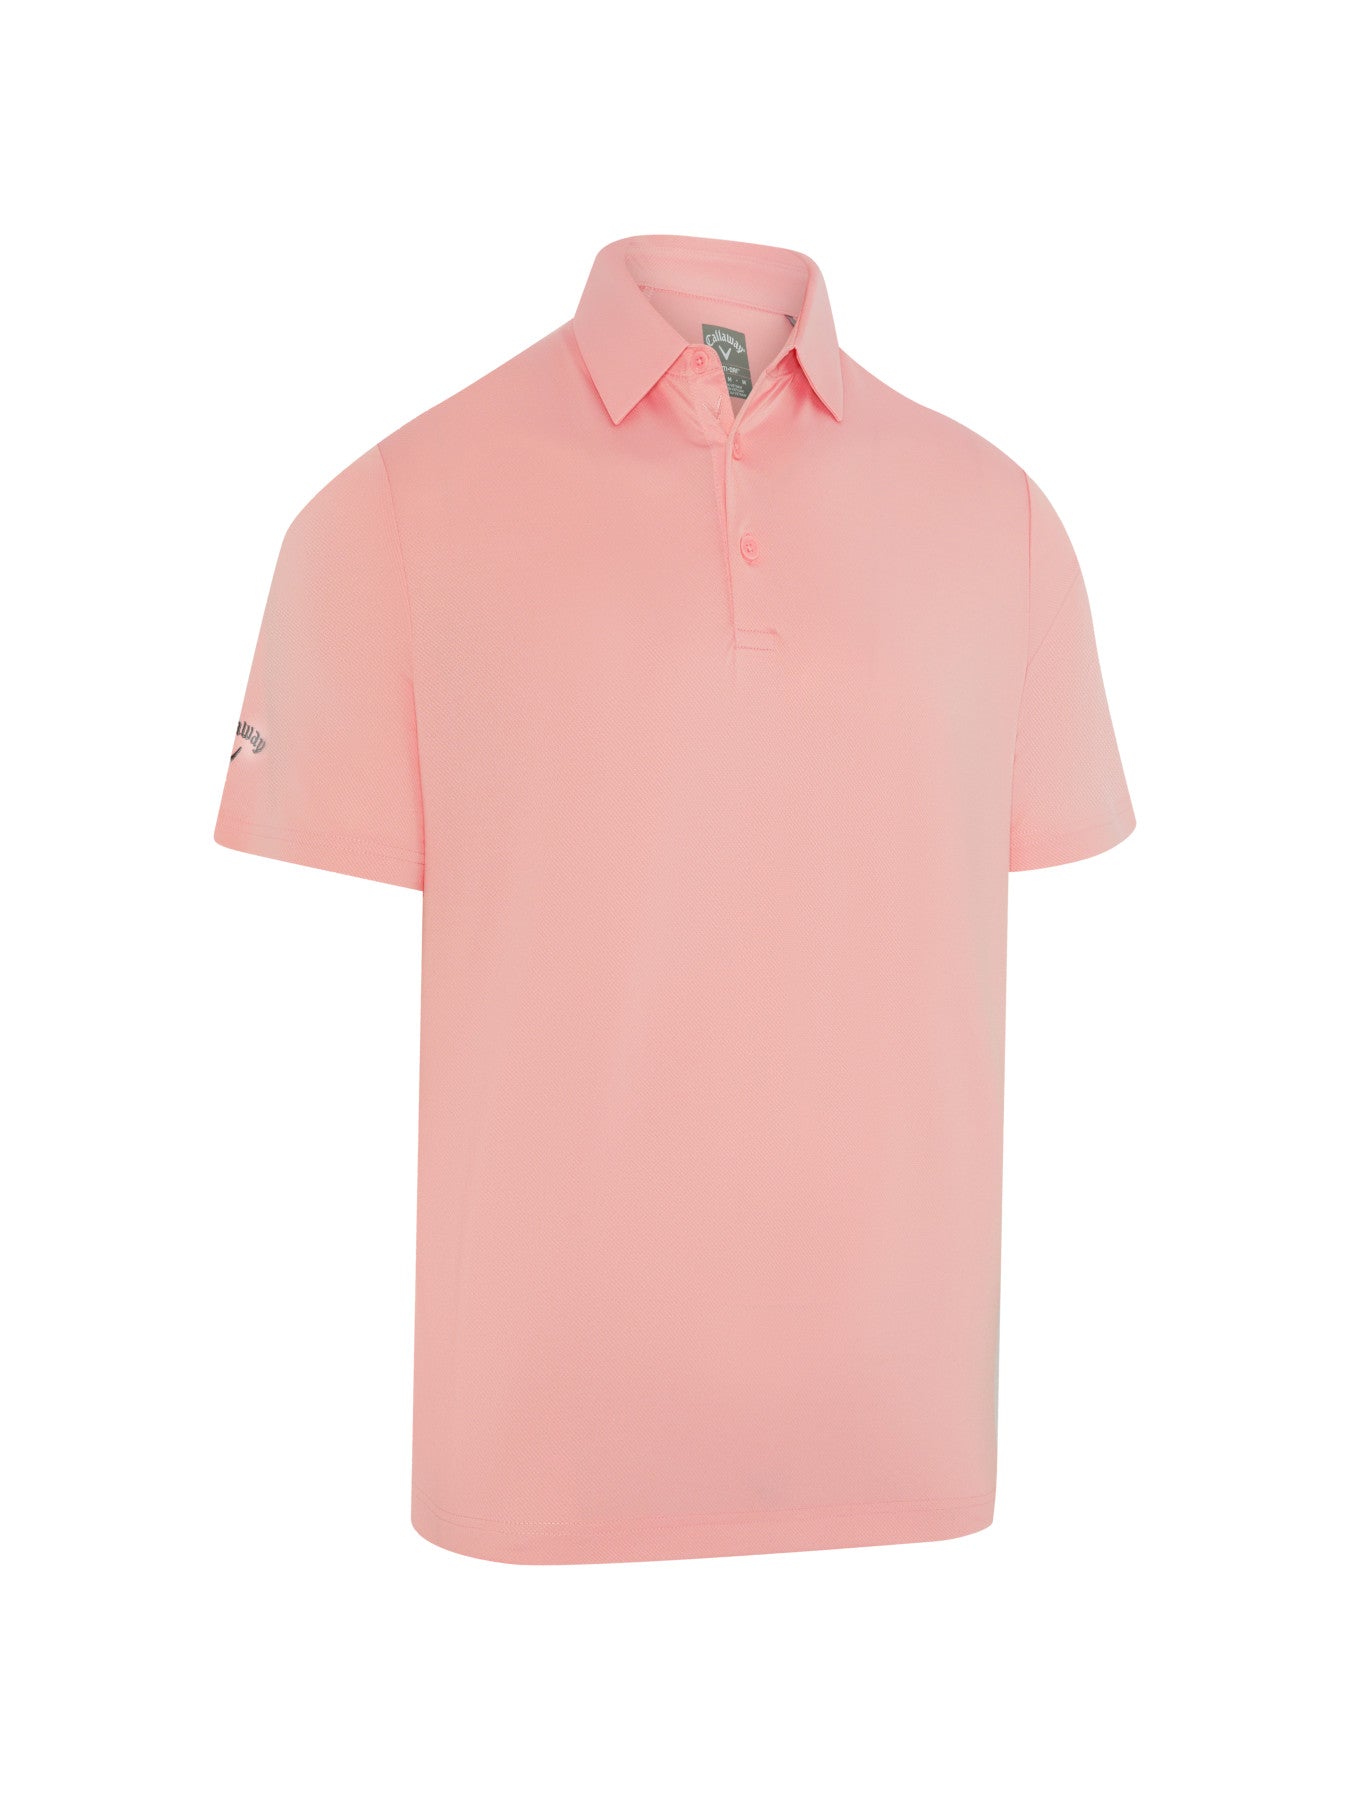 View Solid Swing Tech Short Sleeve Golf Polo Shirt In Candy Pink information